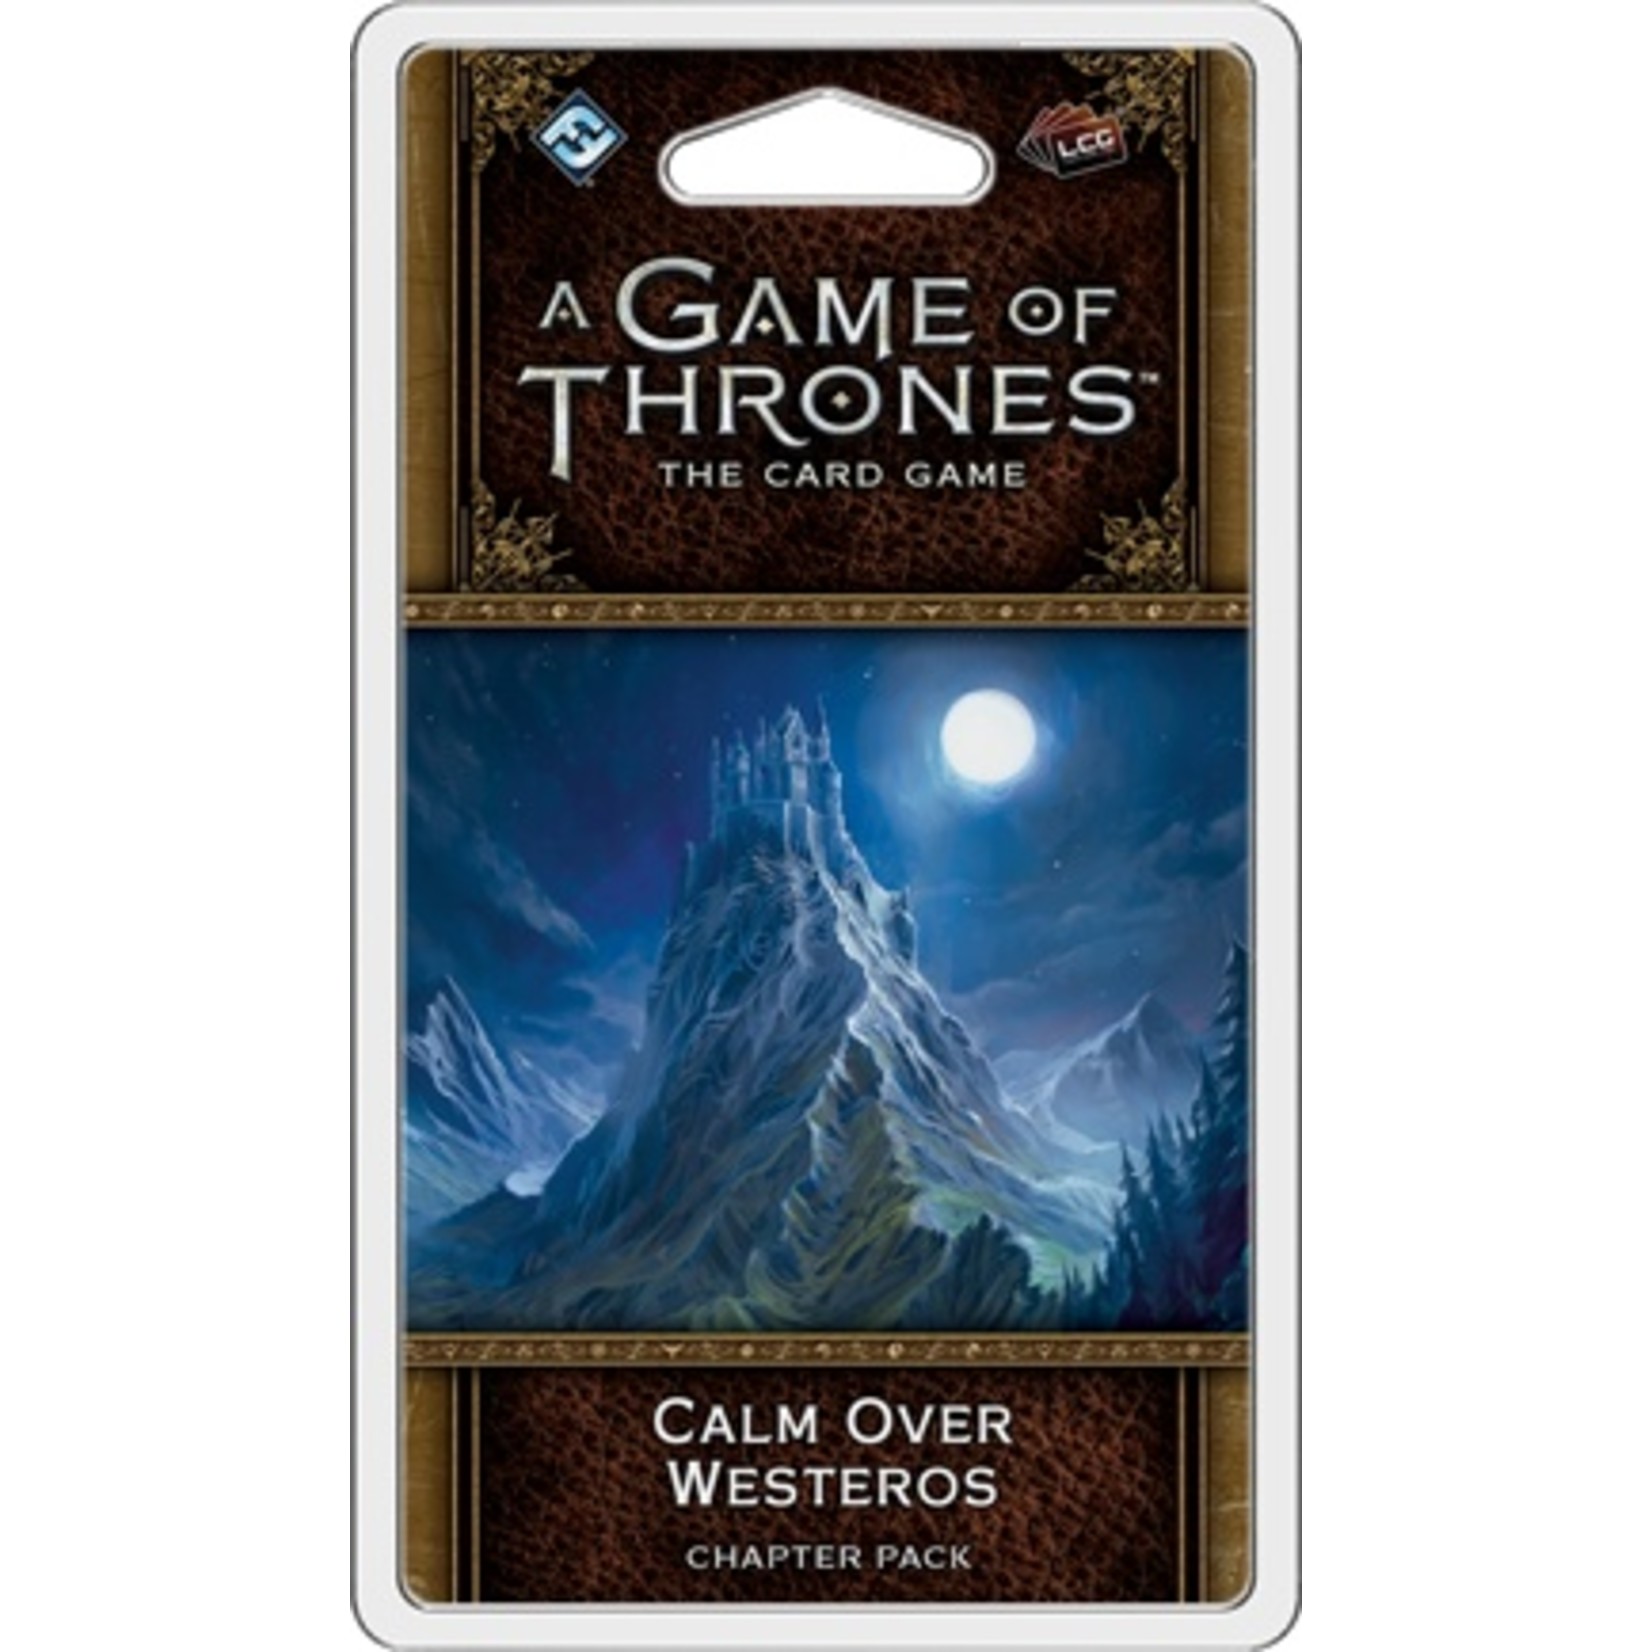 Fantasy Flight A Game of Thrones - The Card Game (Second edition) - Calm over Westeros